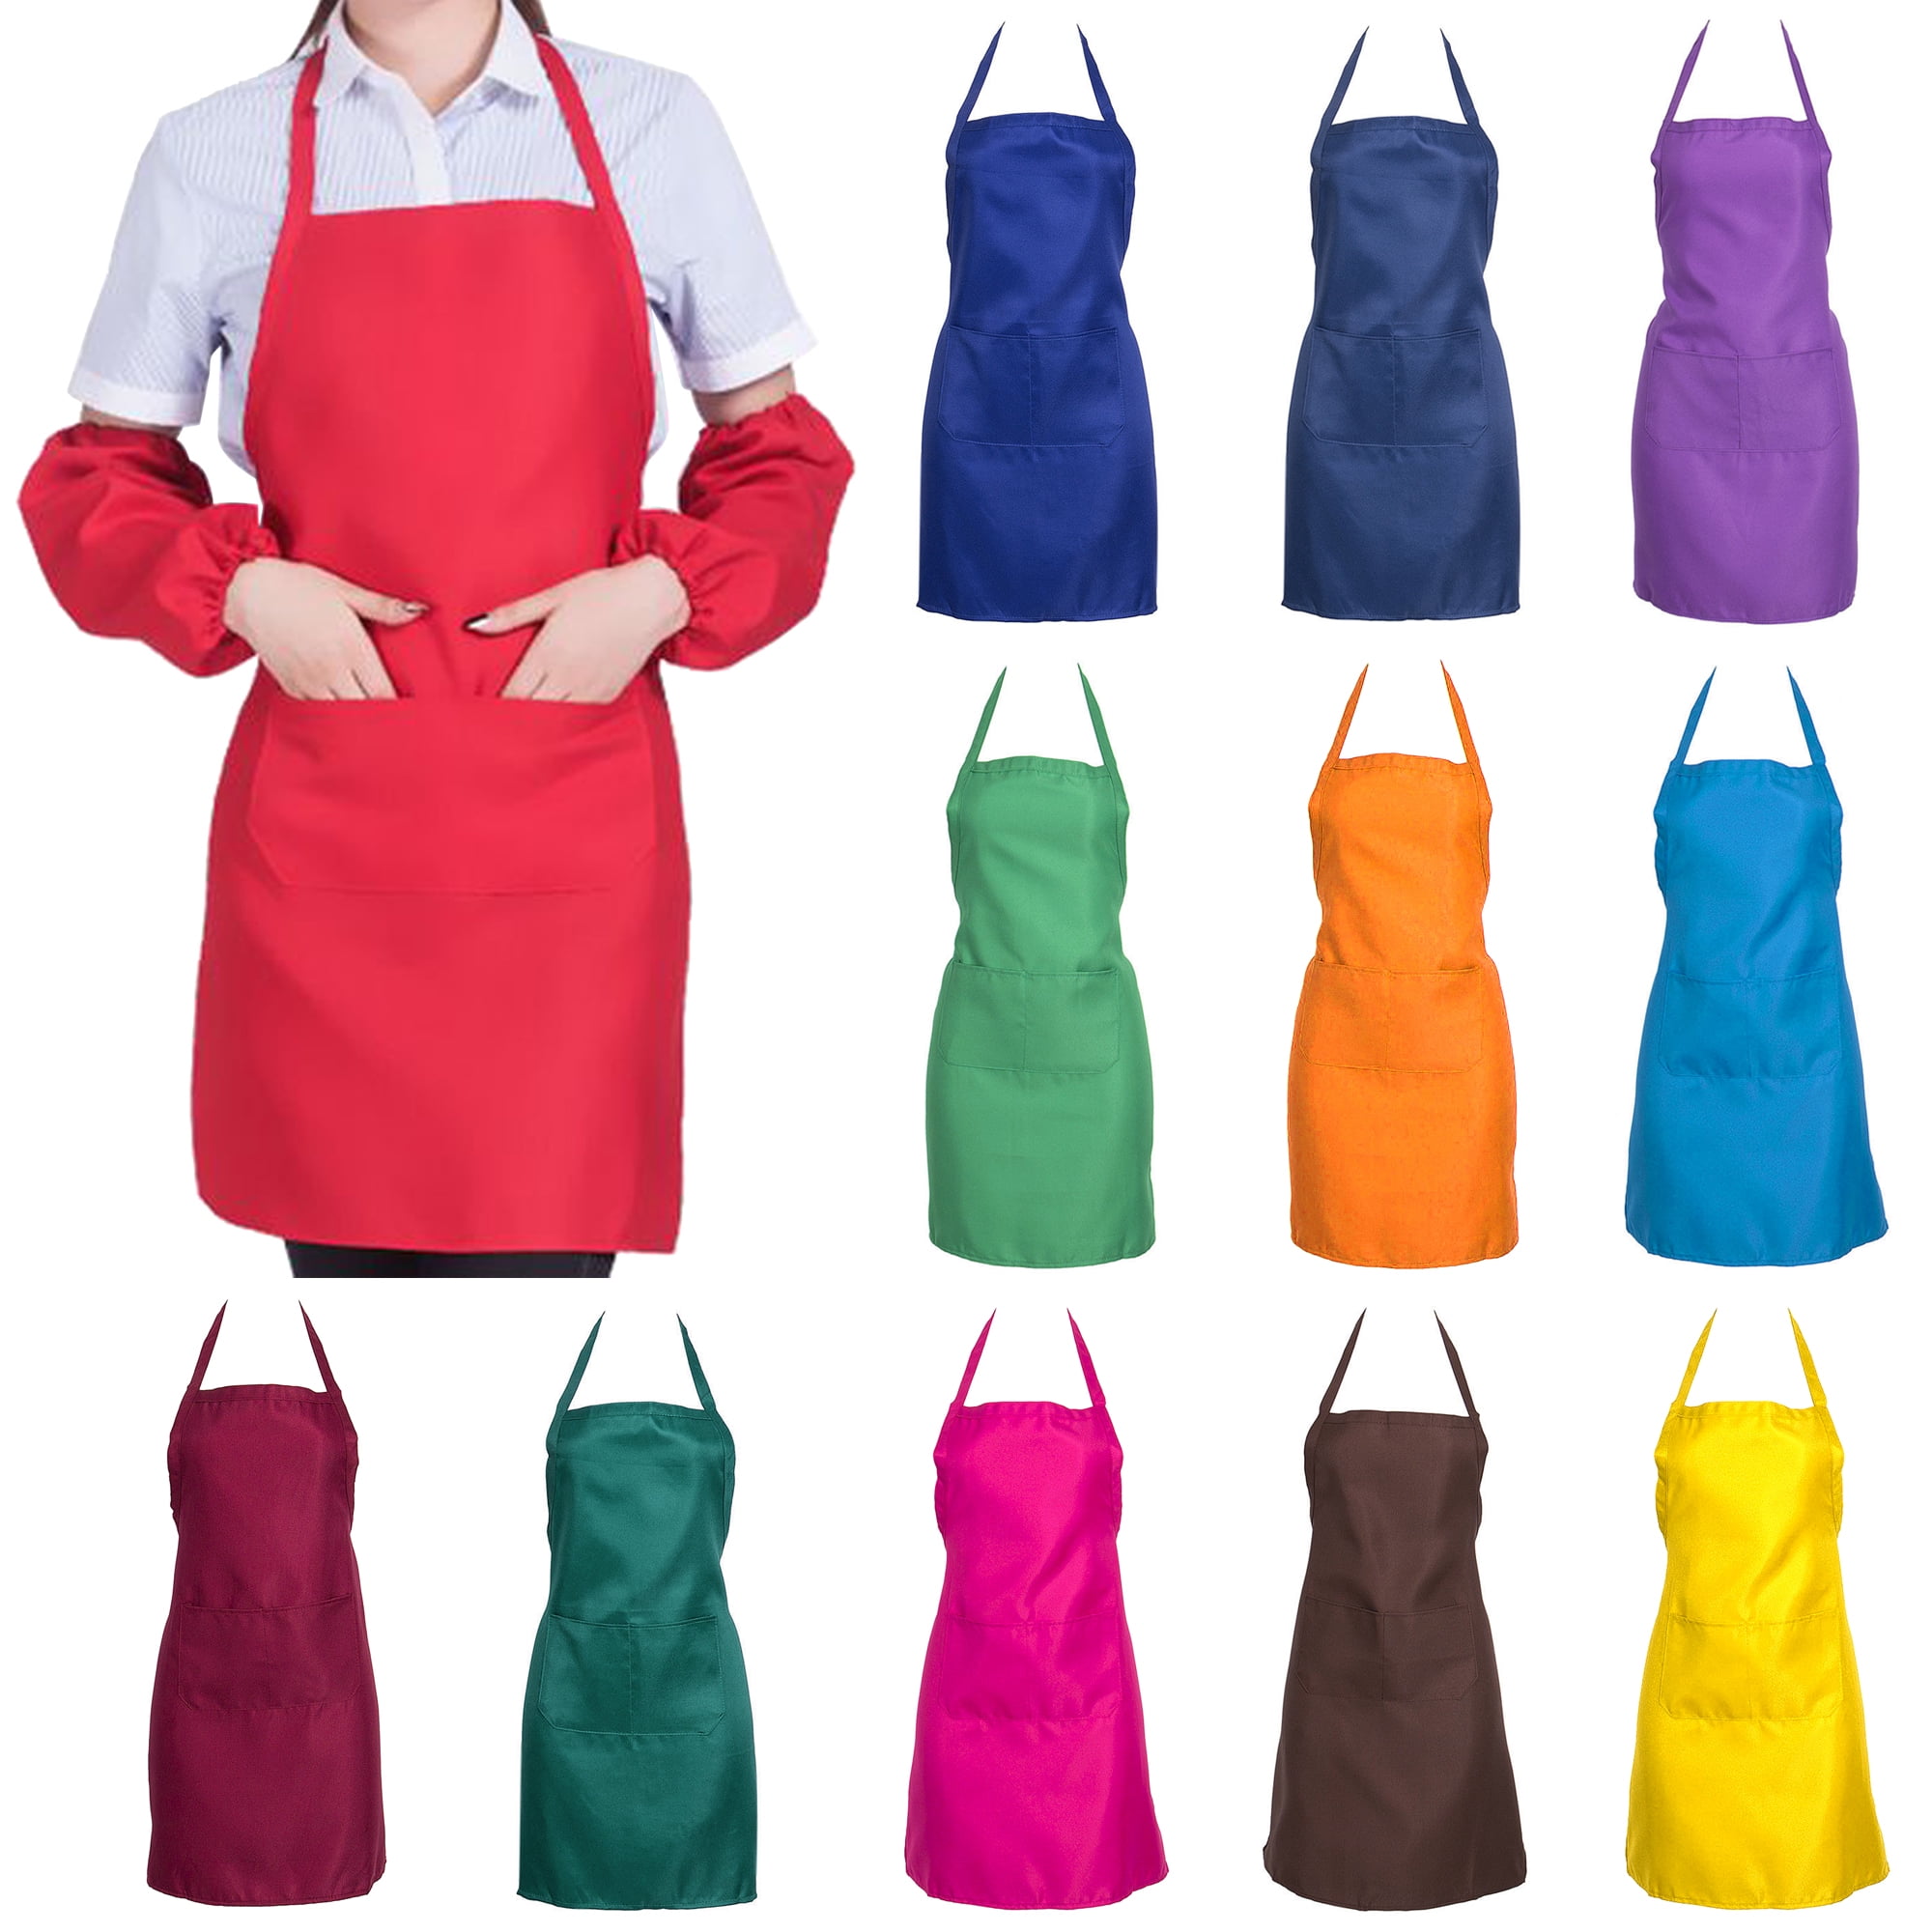 Apron Dress Galaxy Home Kitchen Crafts Adjustable Cooking Baking Adult Cleaning 